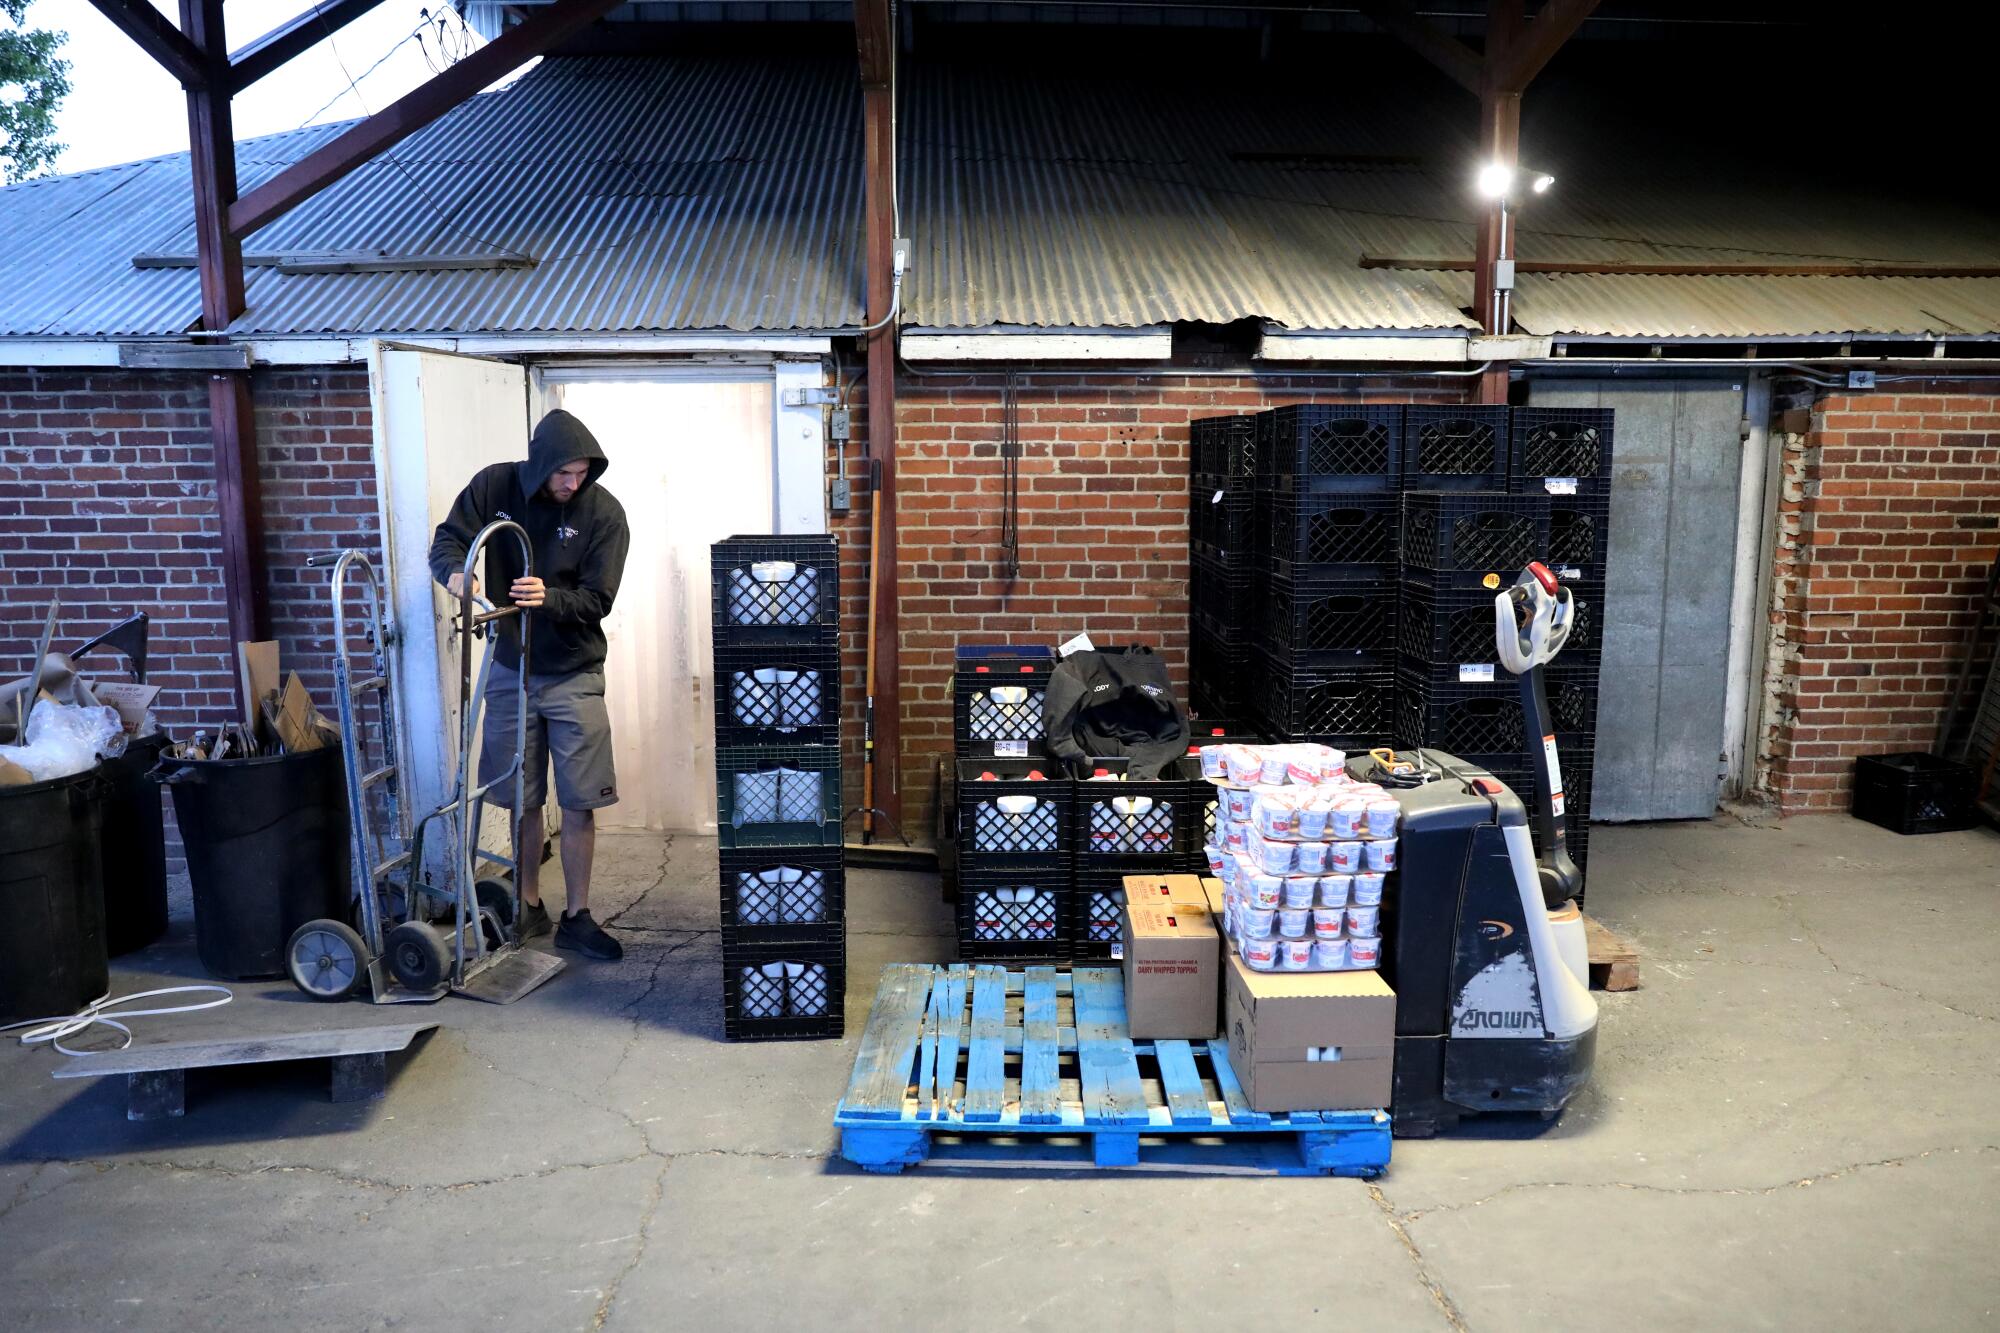 Josh McKernan, owner of Morning Glory Dairy, unloads a shipment of dairy products in Susanville.